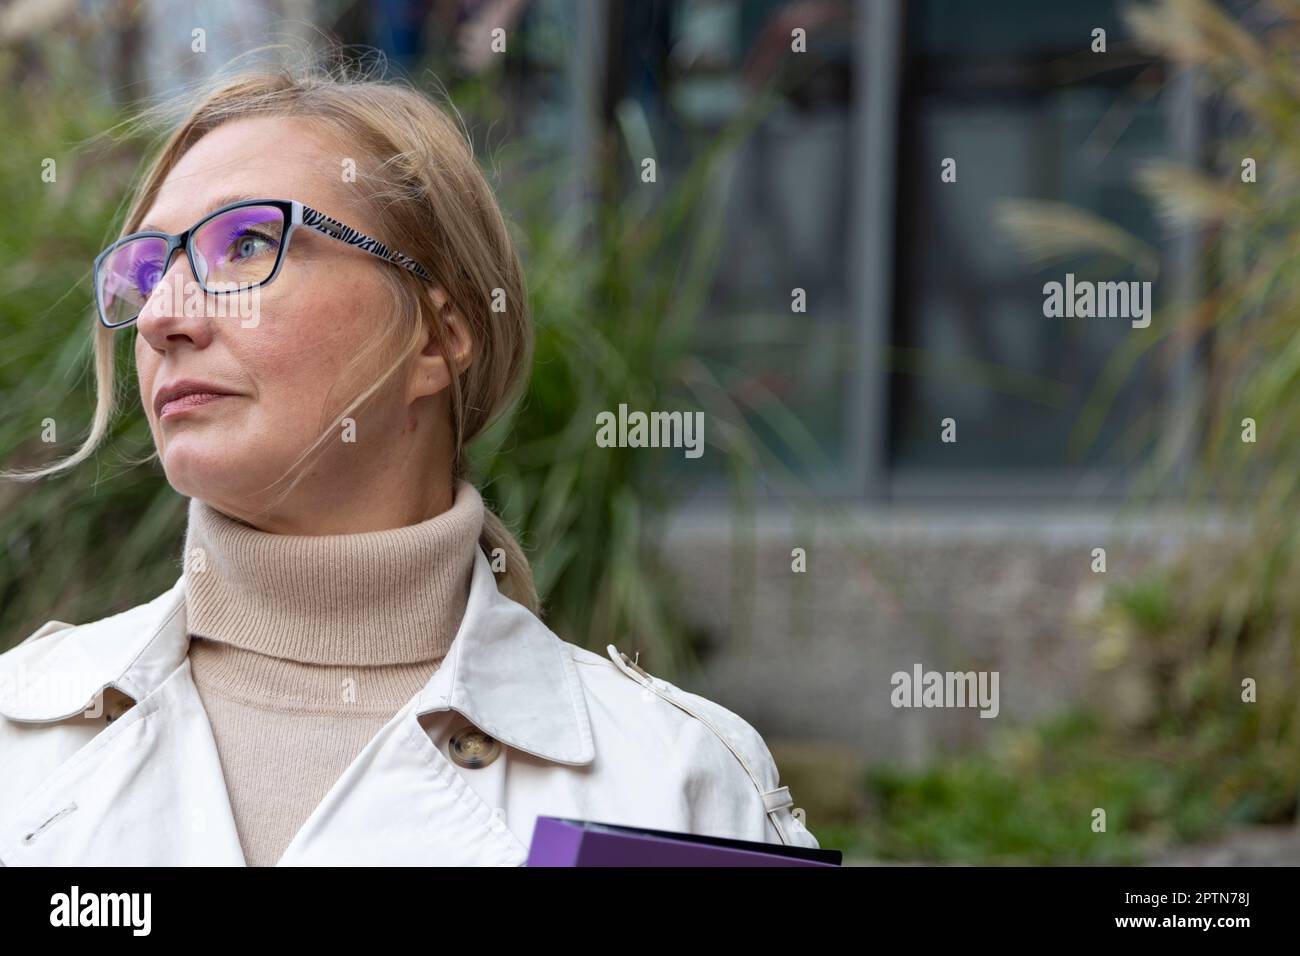 Beautiful matur woman stands near glass building with a folder Stock Photo